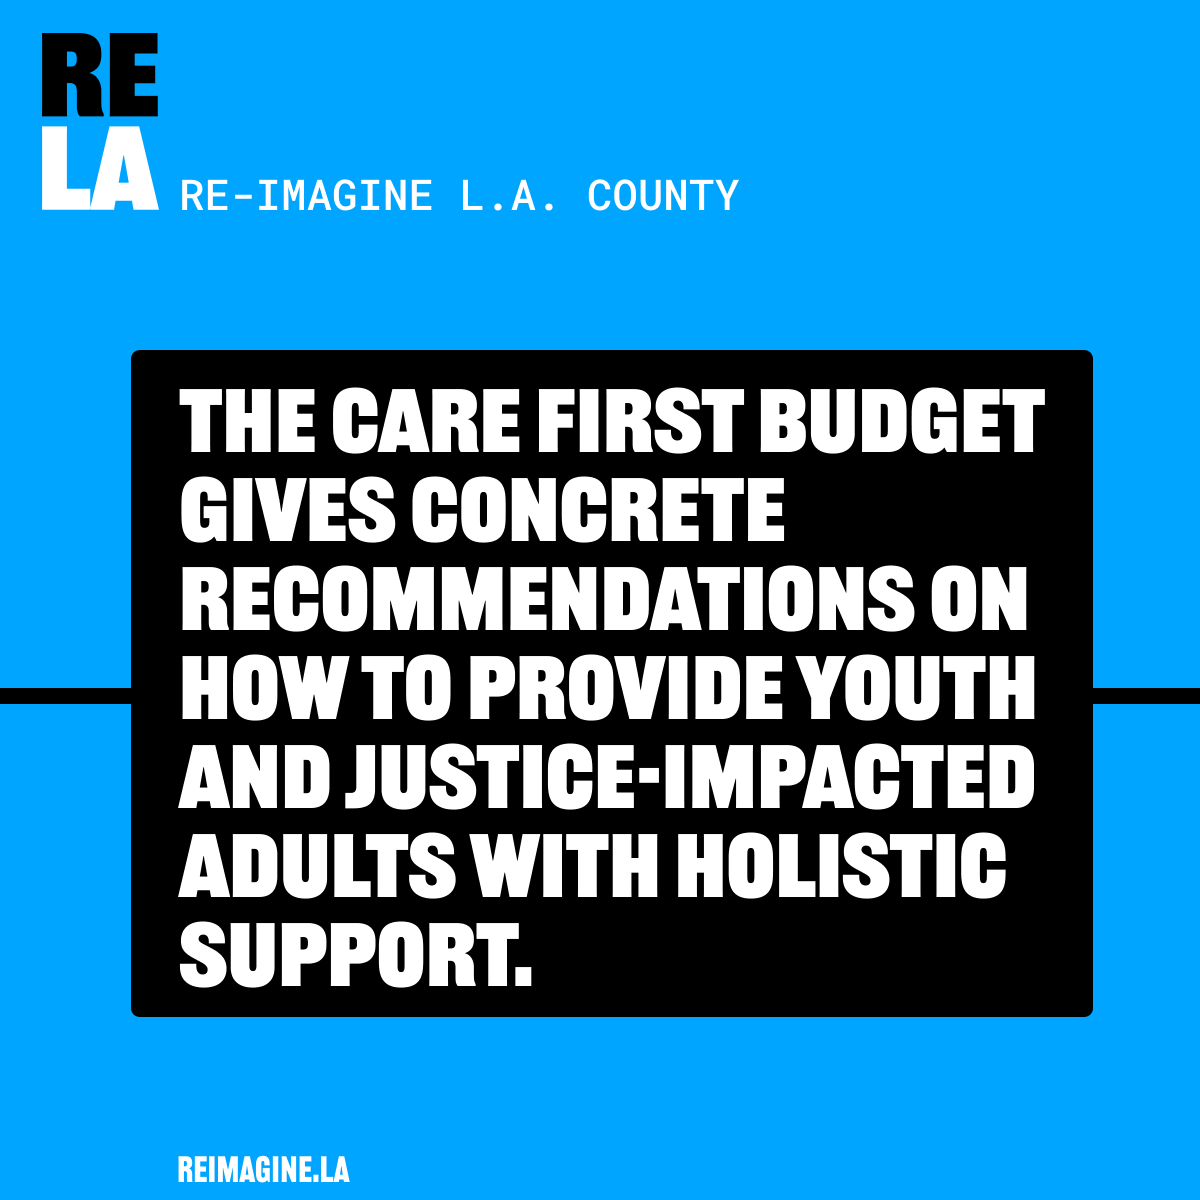 .@LACountyBOS @LACountyCEO @hildasolis @HollyJMitchell @SheilaKuehl @SupJaniceHahn @kathrynbarger 

#FullyFundCareFirst #CareFirst #CareFirstBudget #CloseMCJ #YouthJusticeReimagined